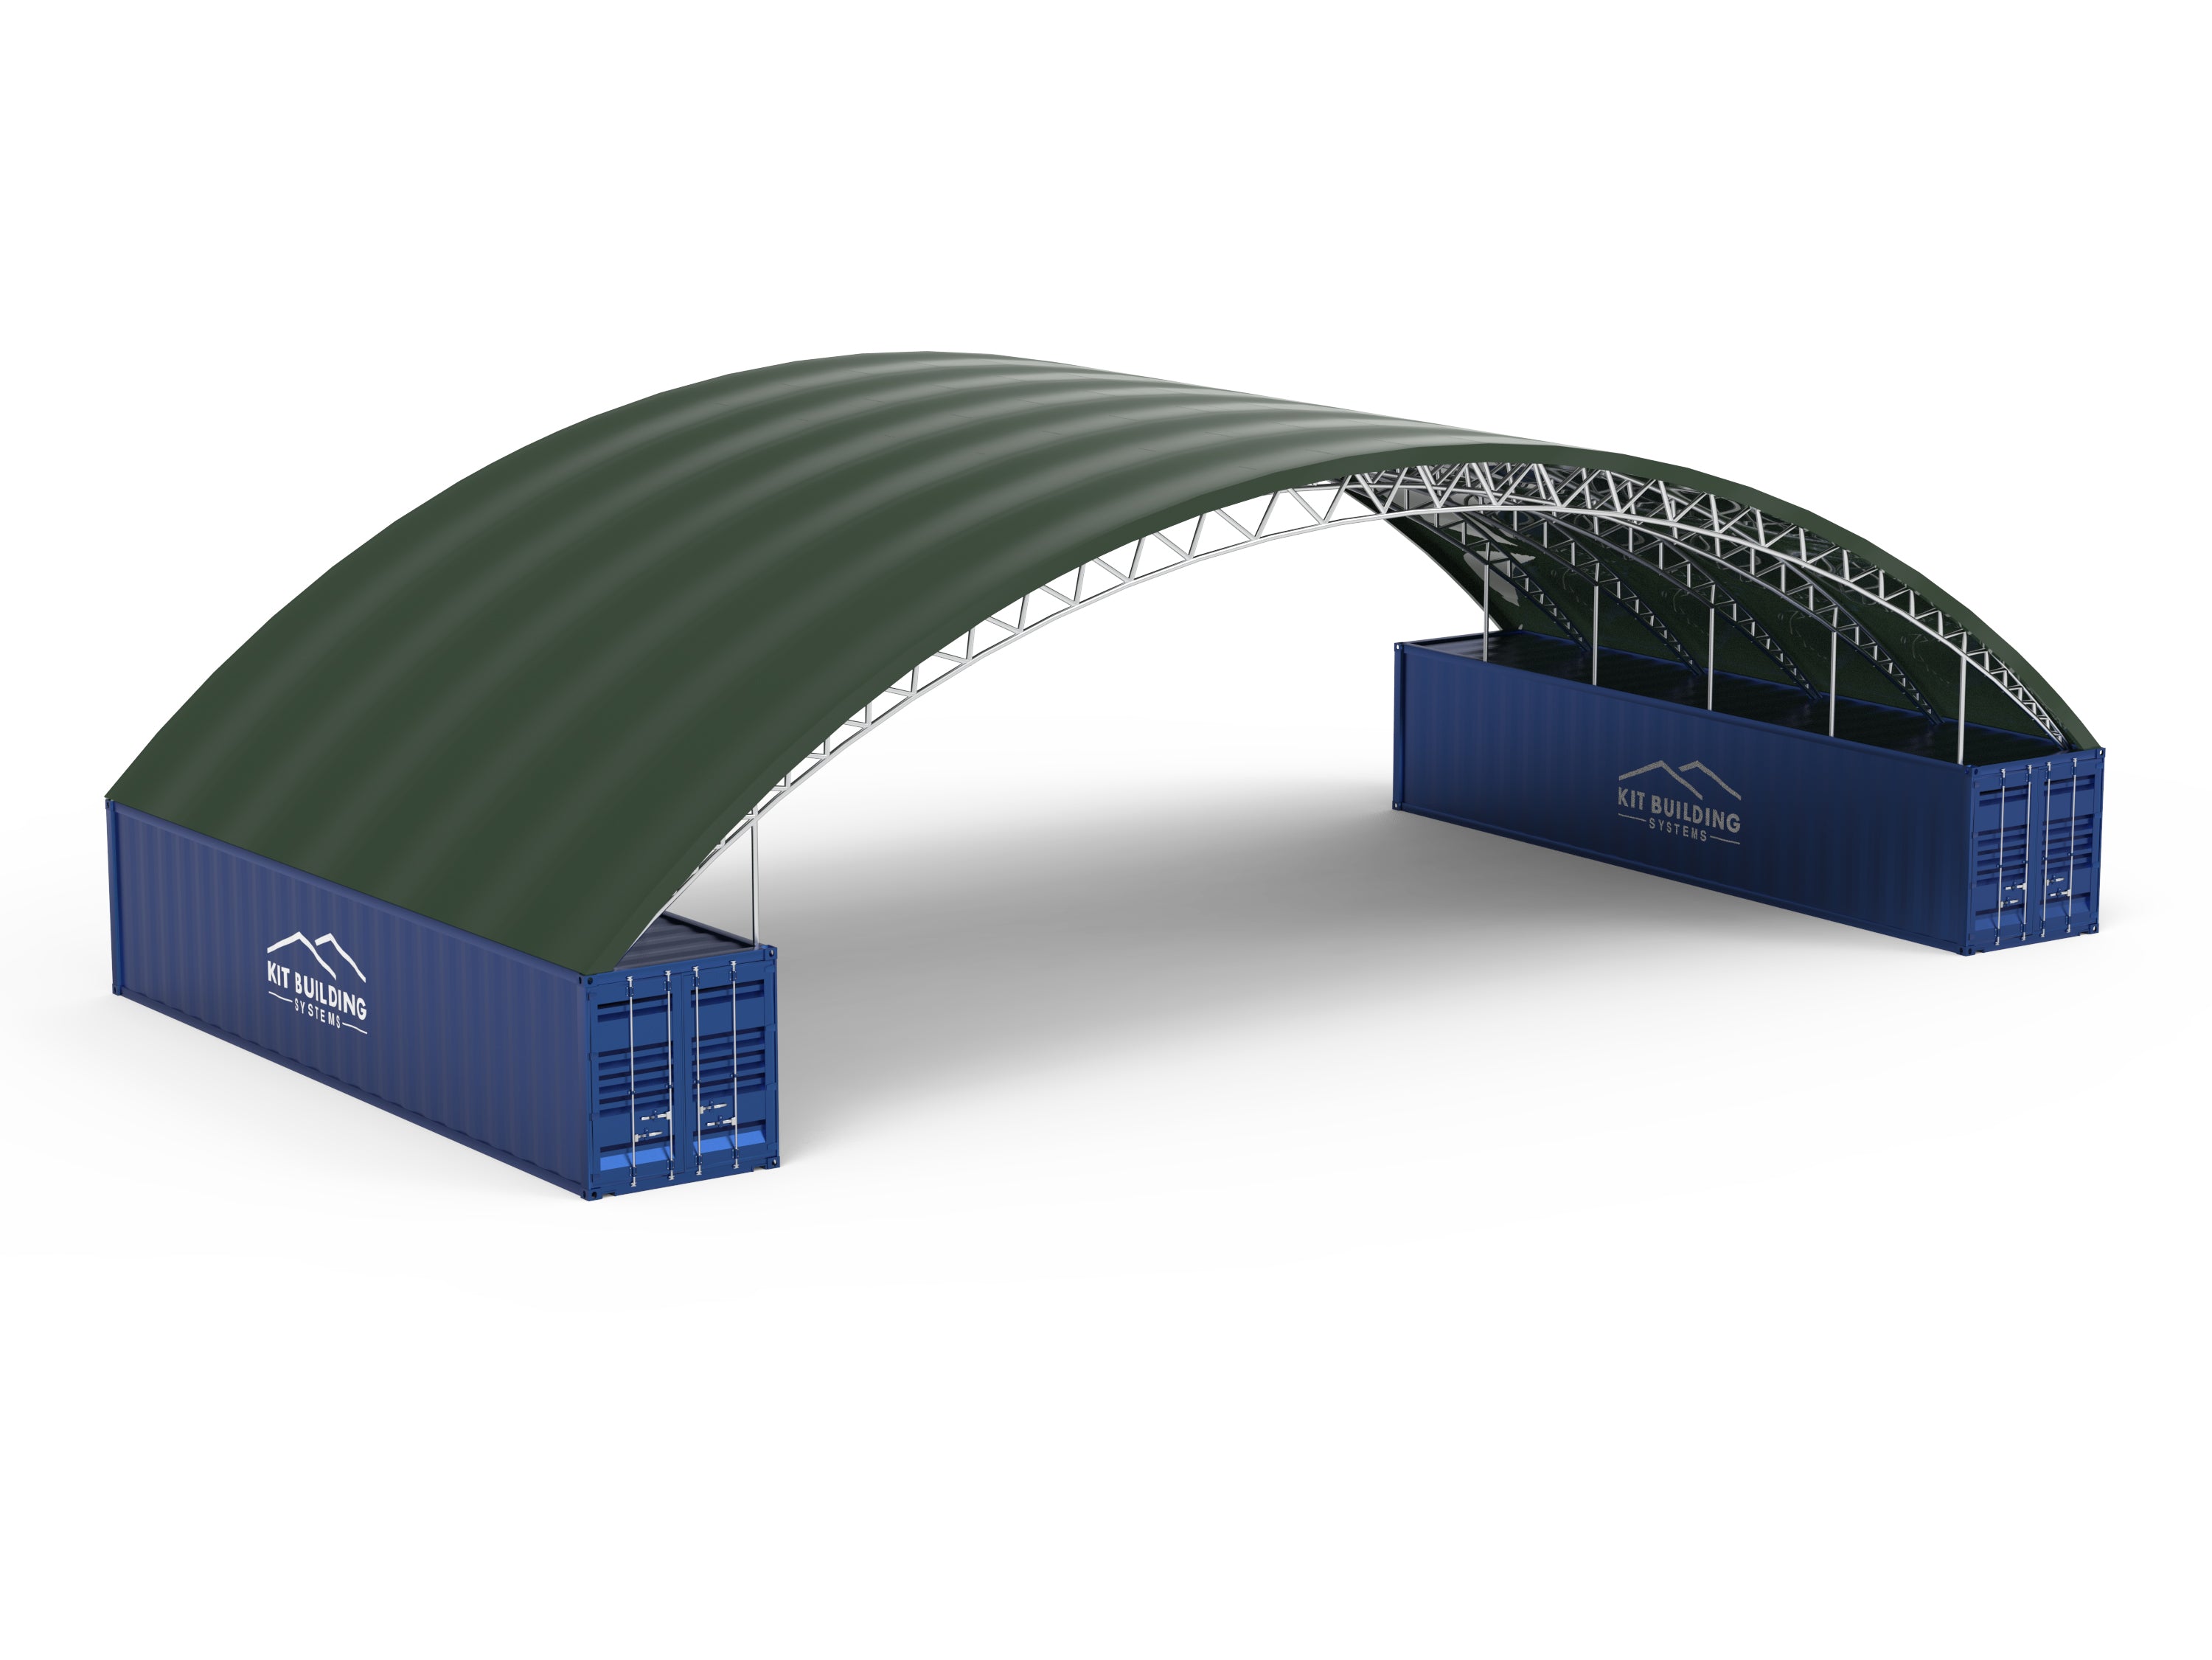 18m x 12m - Double Truss Container canopy - Open both ends - Green